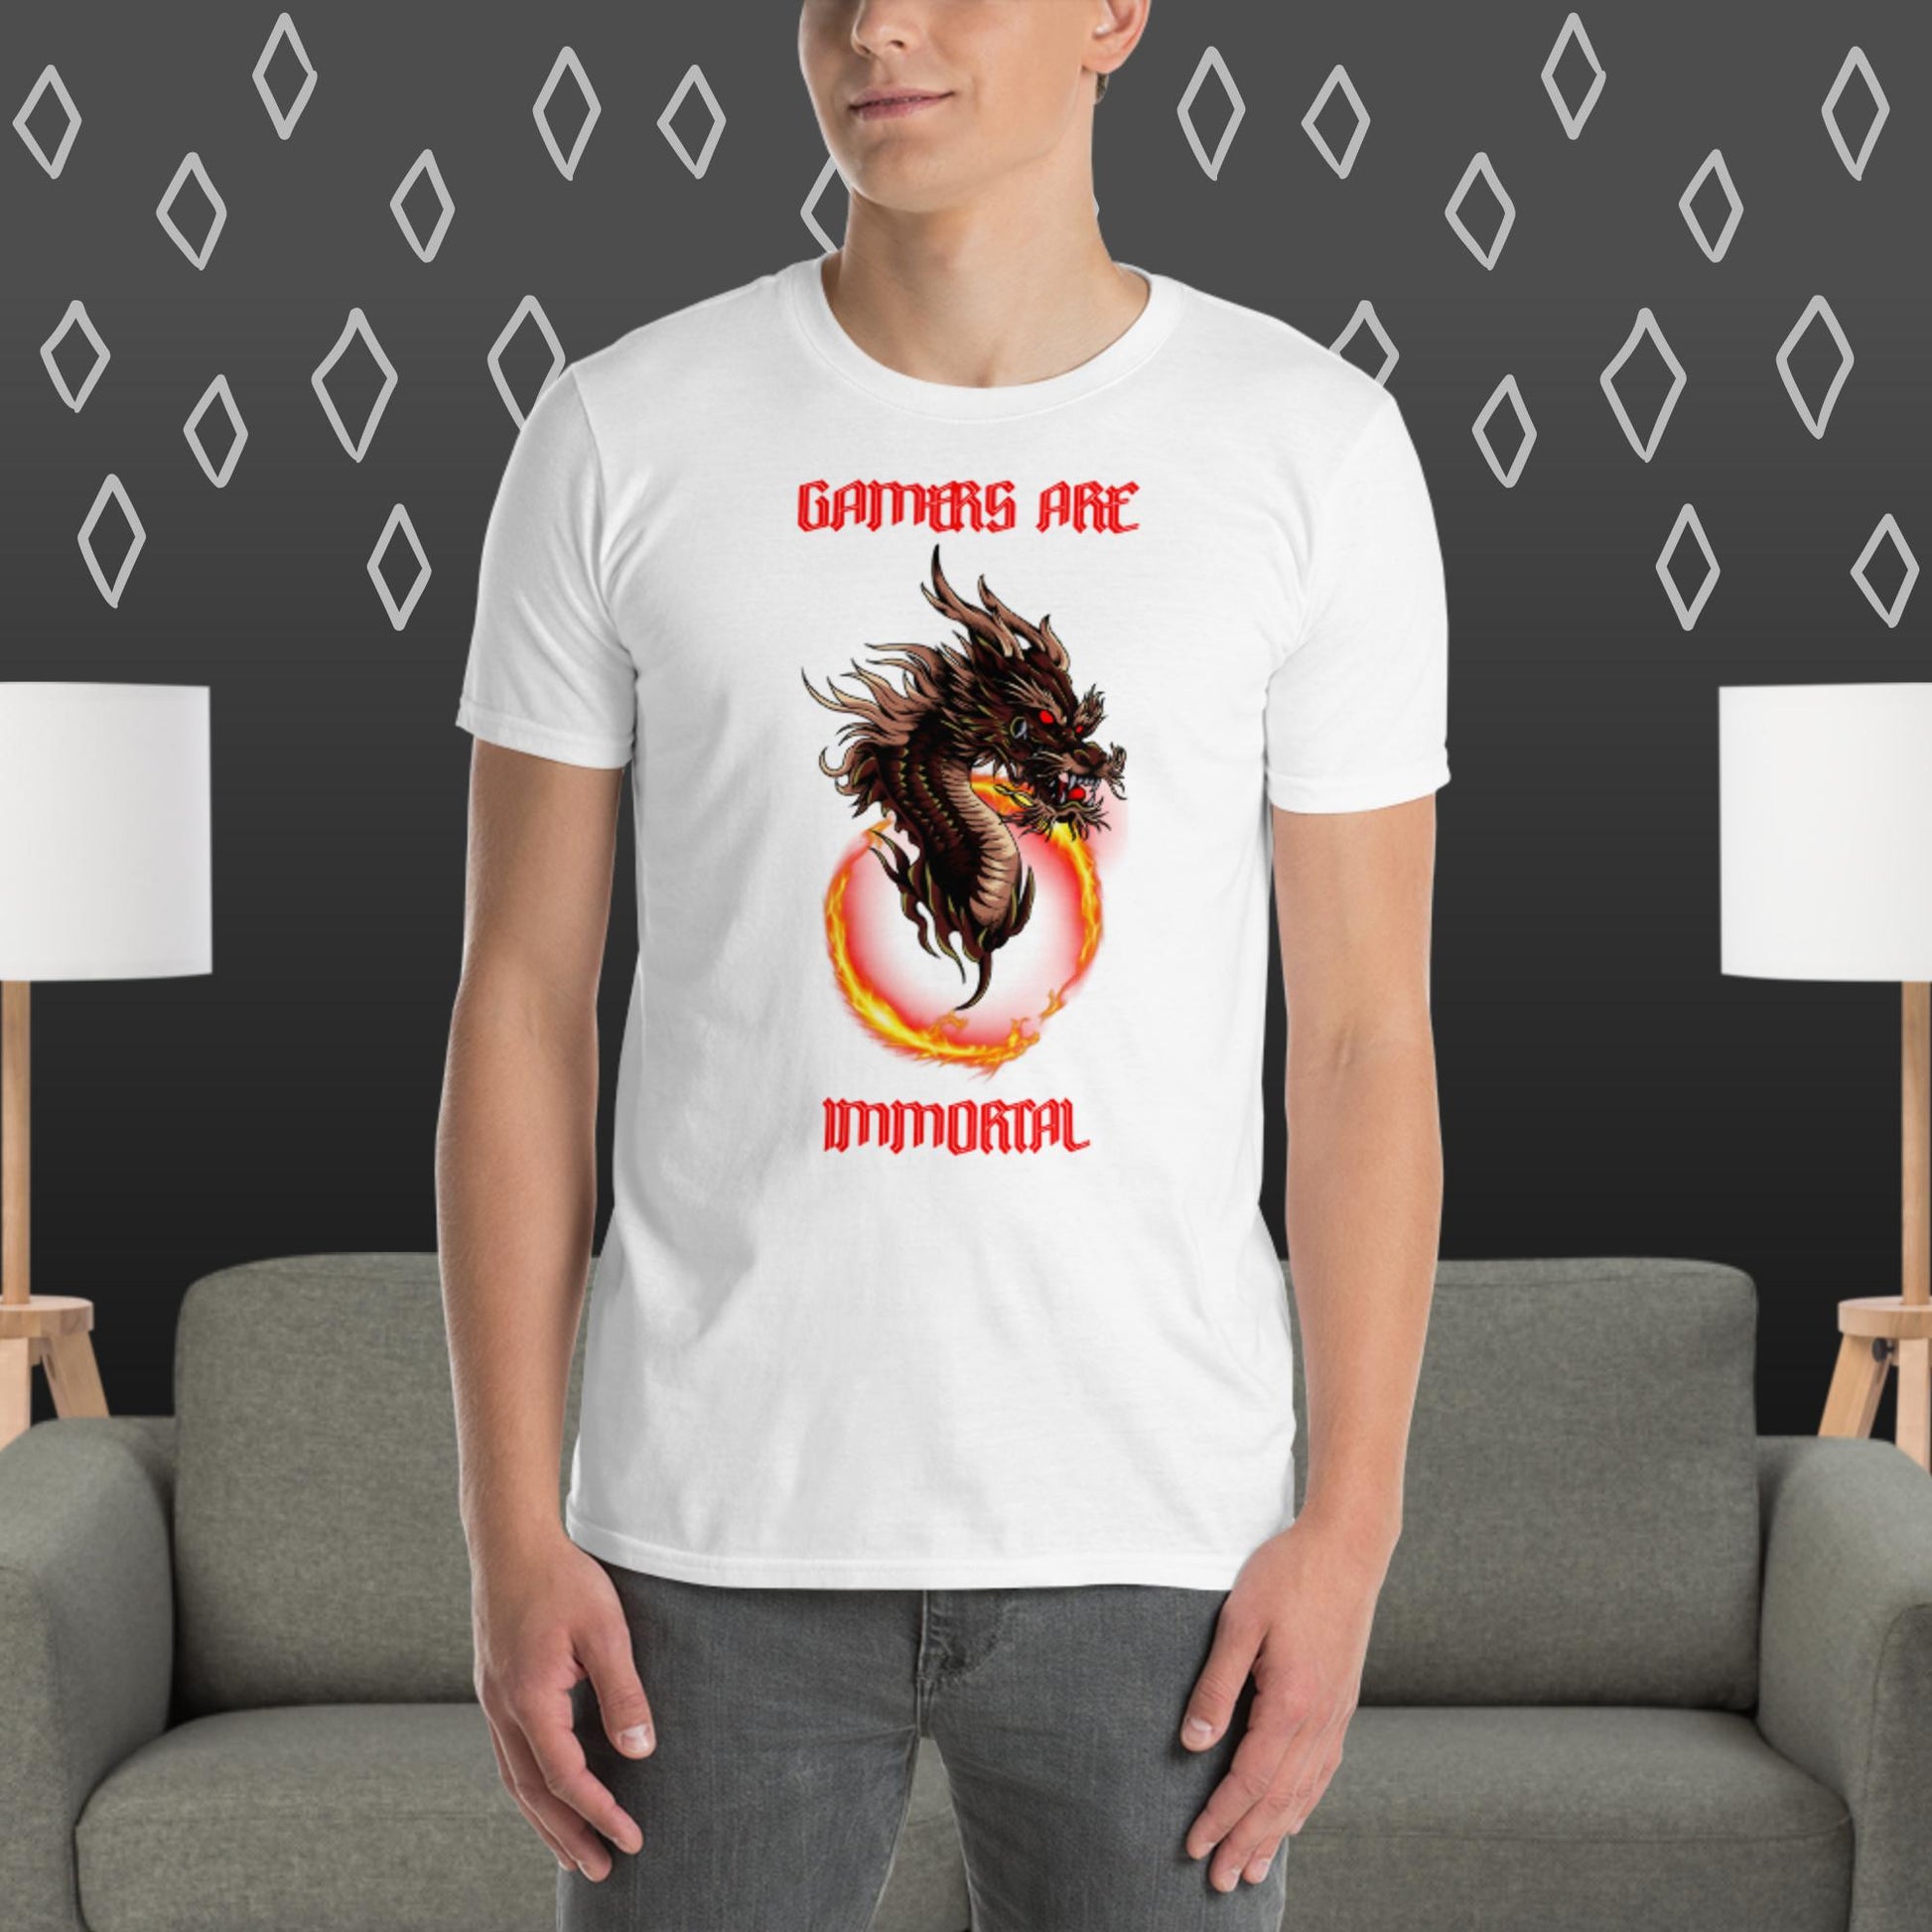 Man in white t-shirt with gamers are immortal and a dragon coming out of fire ring printed on